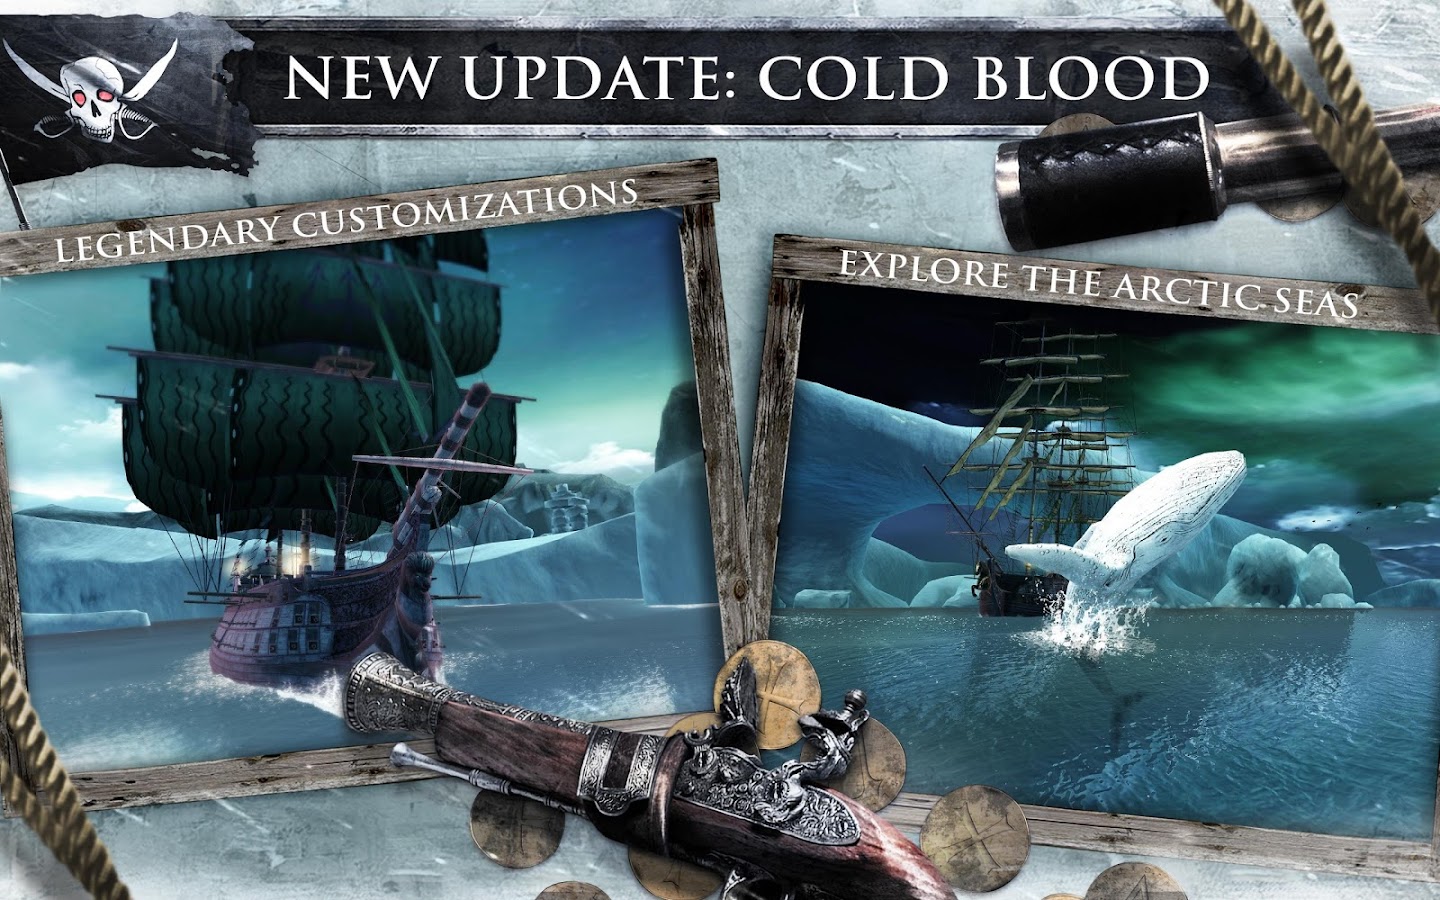 Assassin's Creed Pirates [v1.6.0 Apk] Android Game